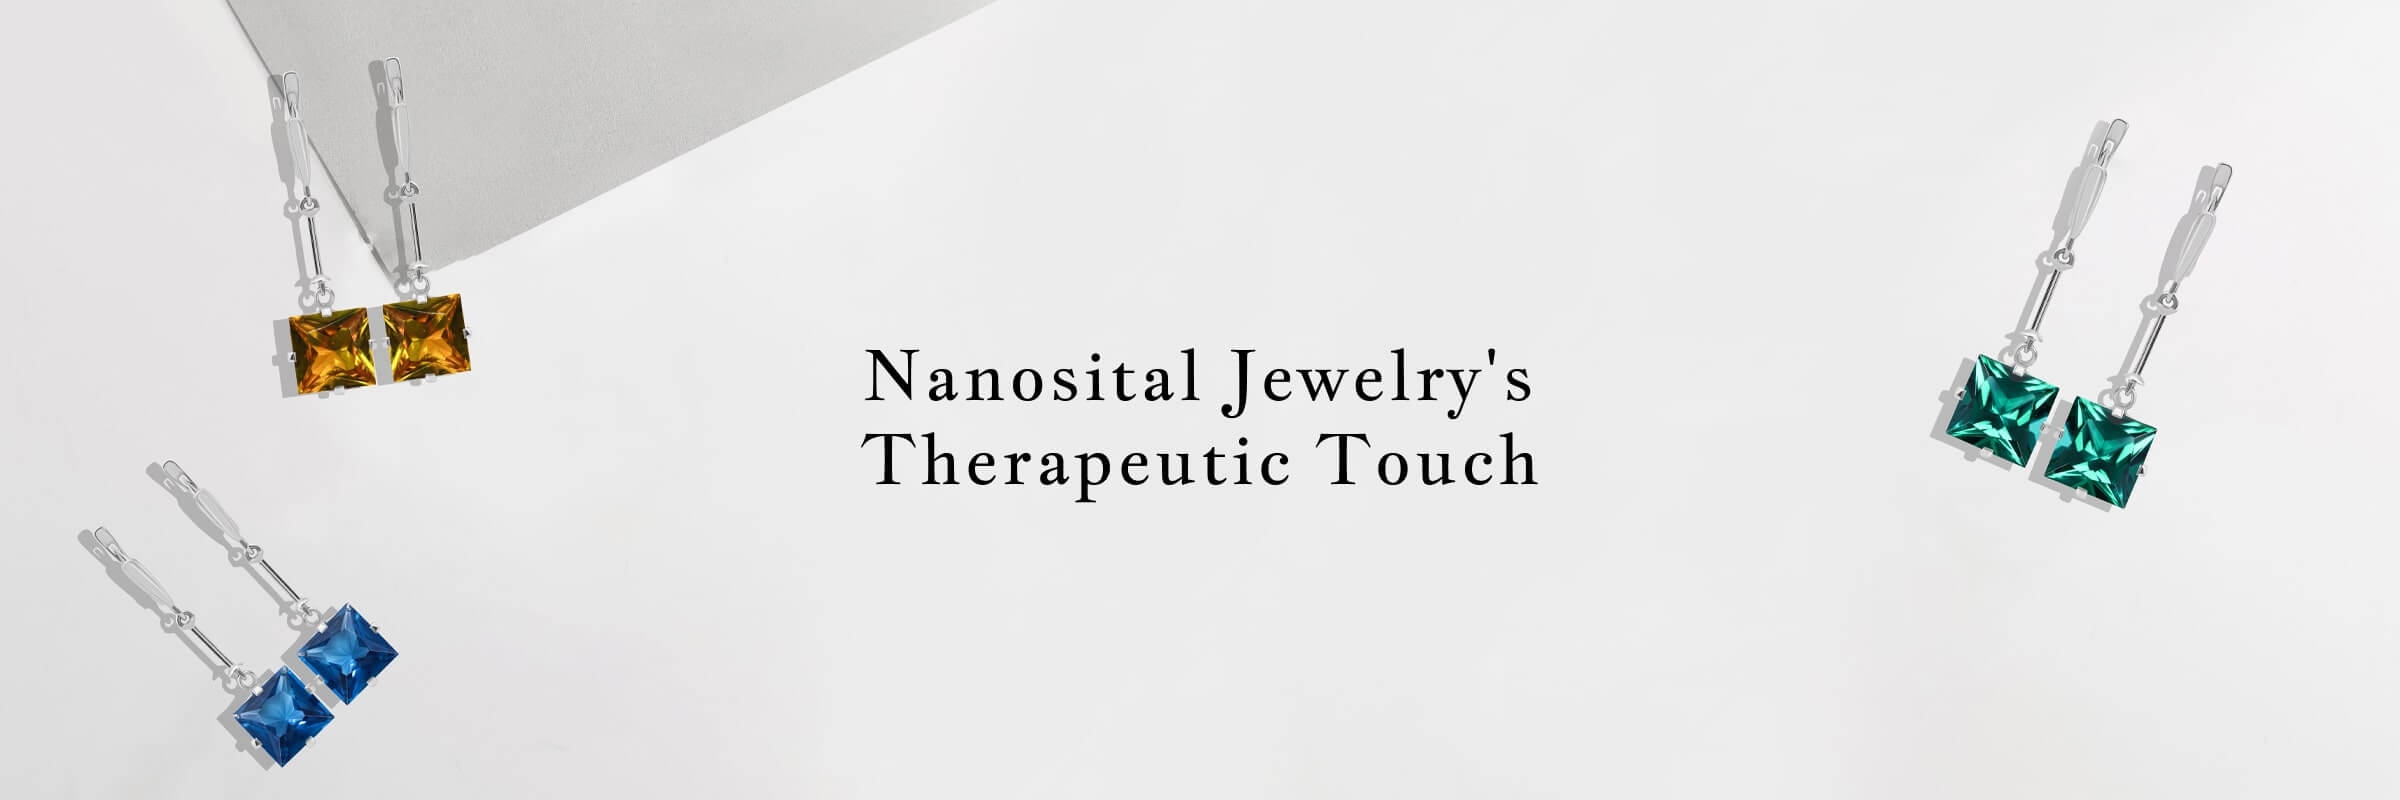 Physical Healing From Wearing Nanosital Jewelry